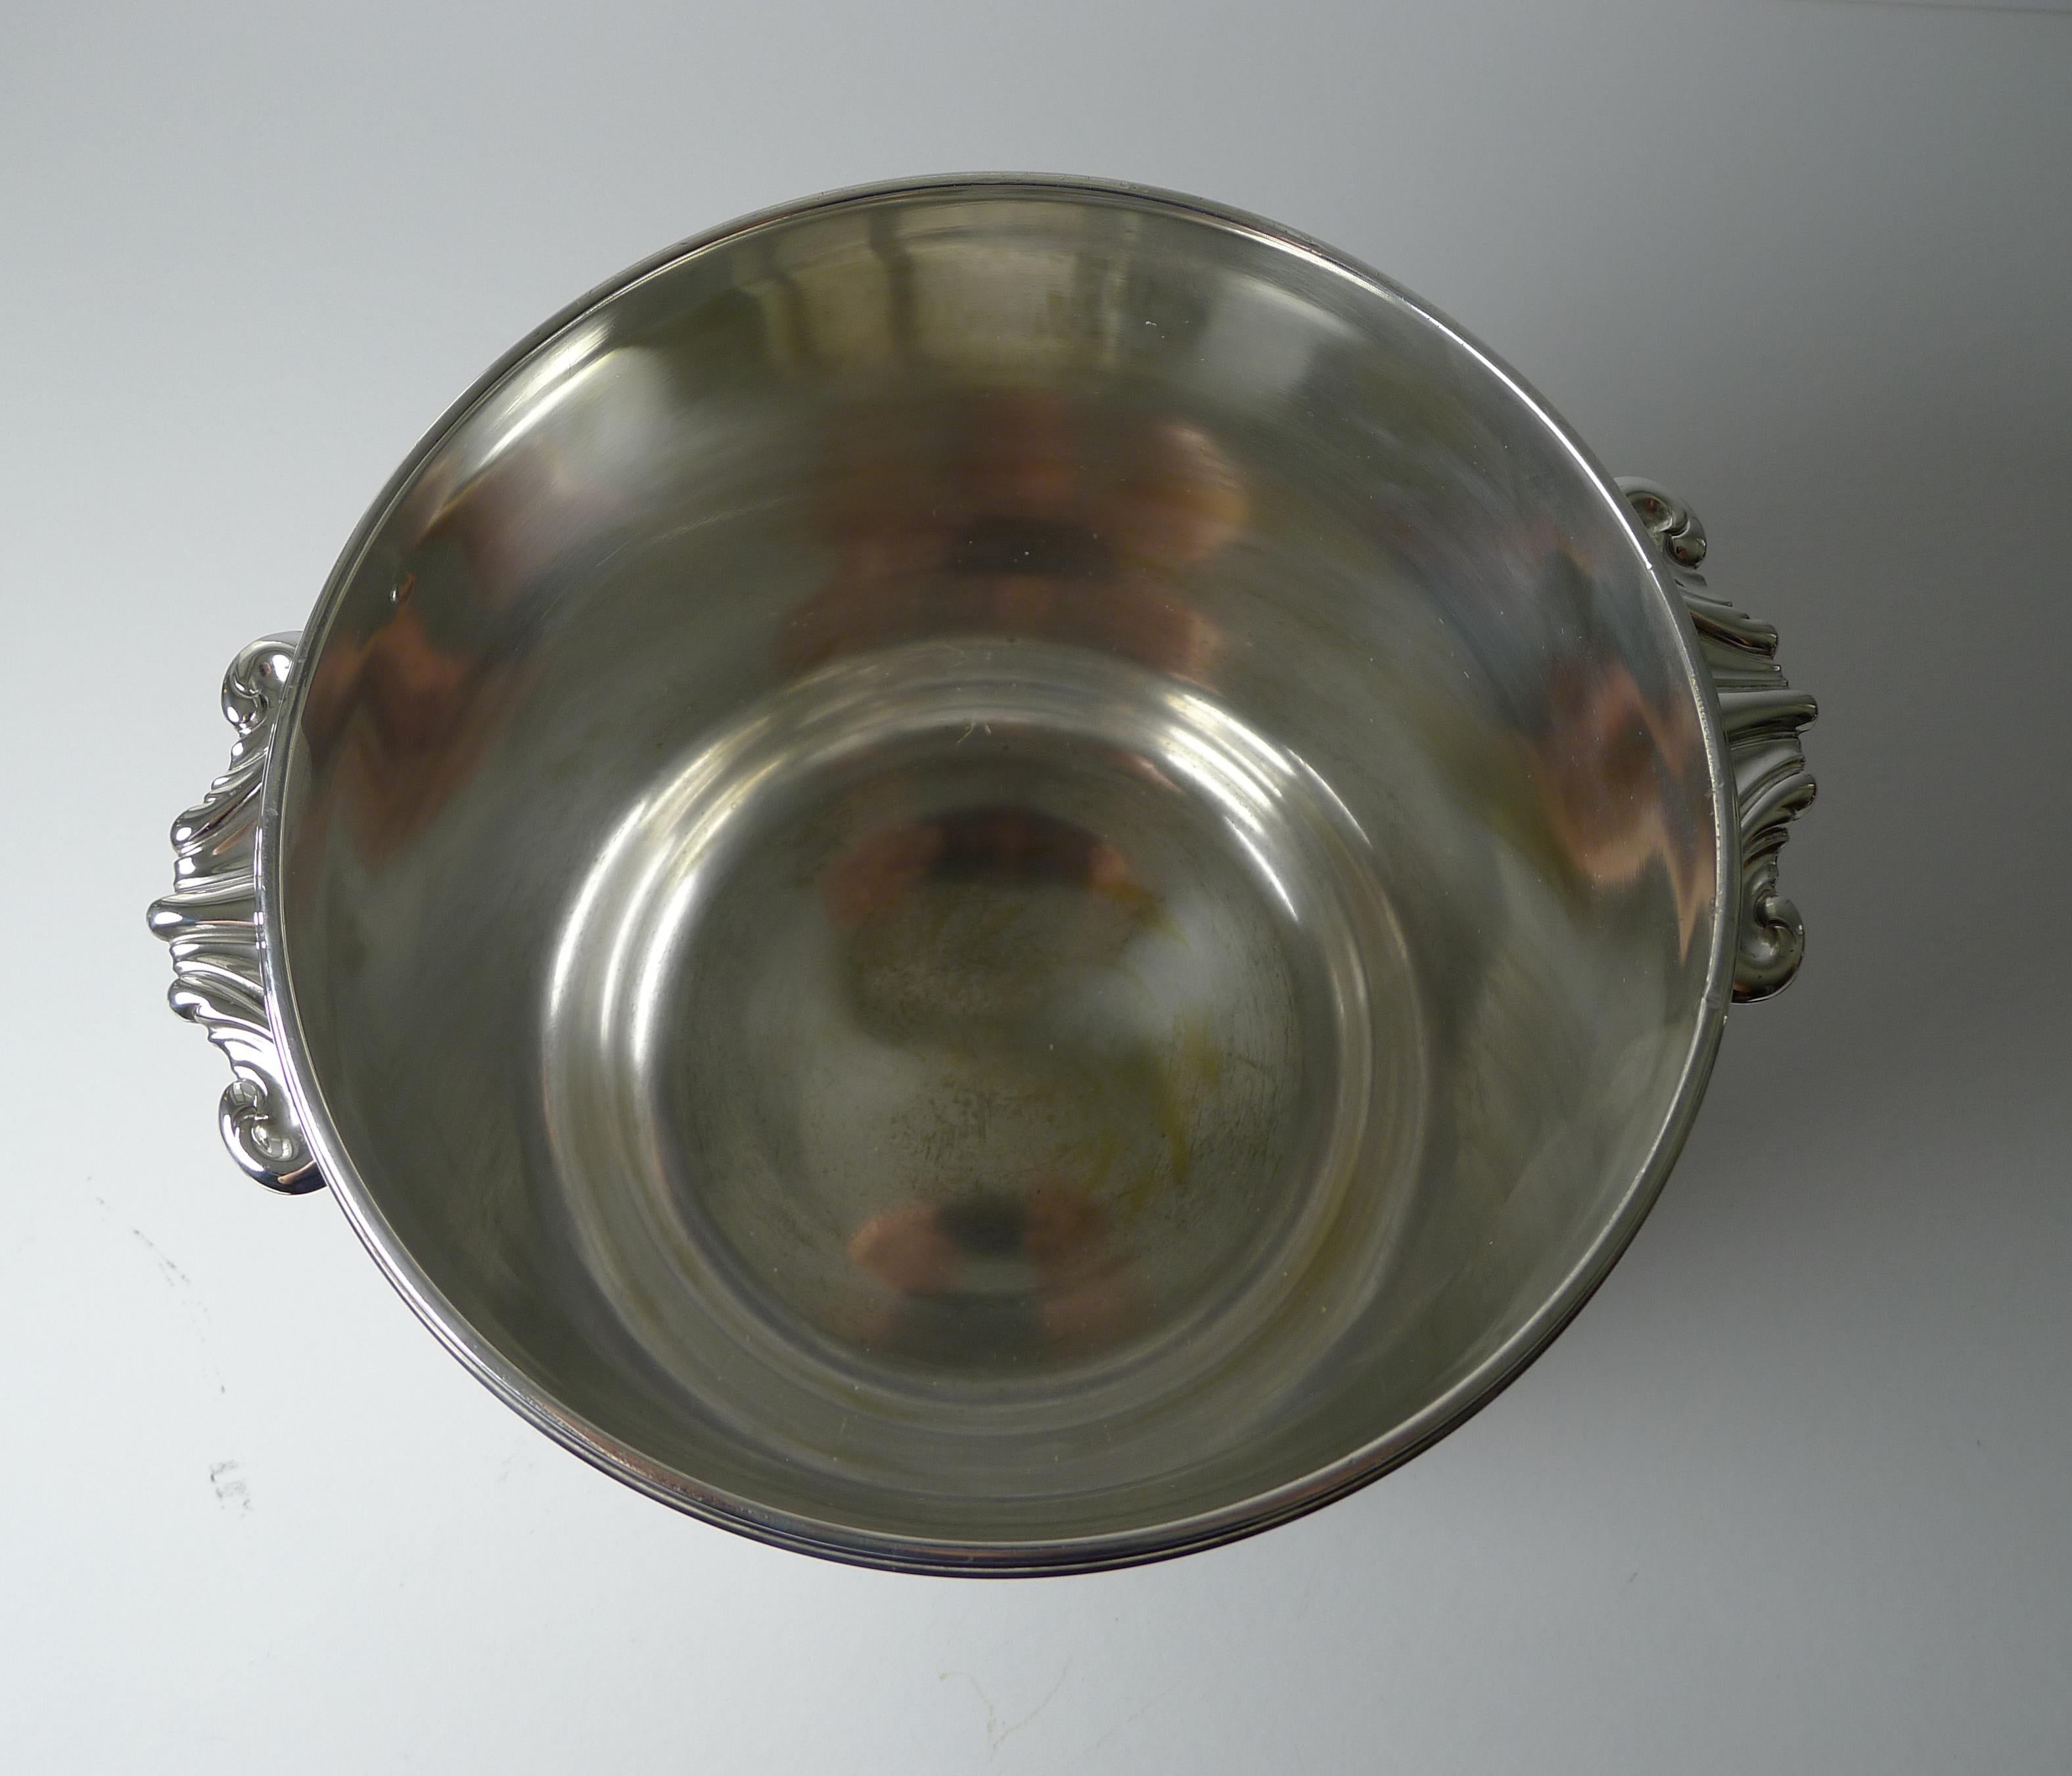 Vintage French Silver Plated Wine or Champagne Cooler / Bucket, Puiforcat In Good Condition For Sale In Bath, GB